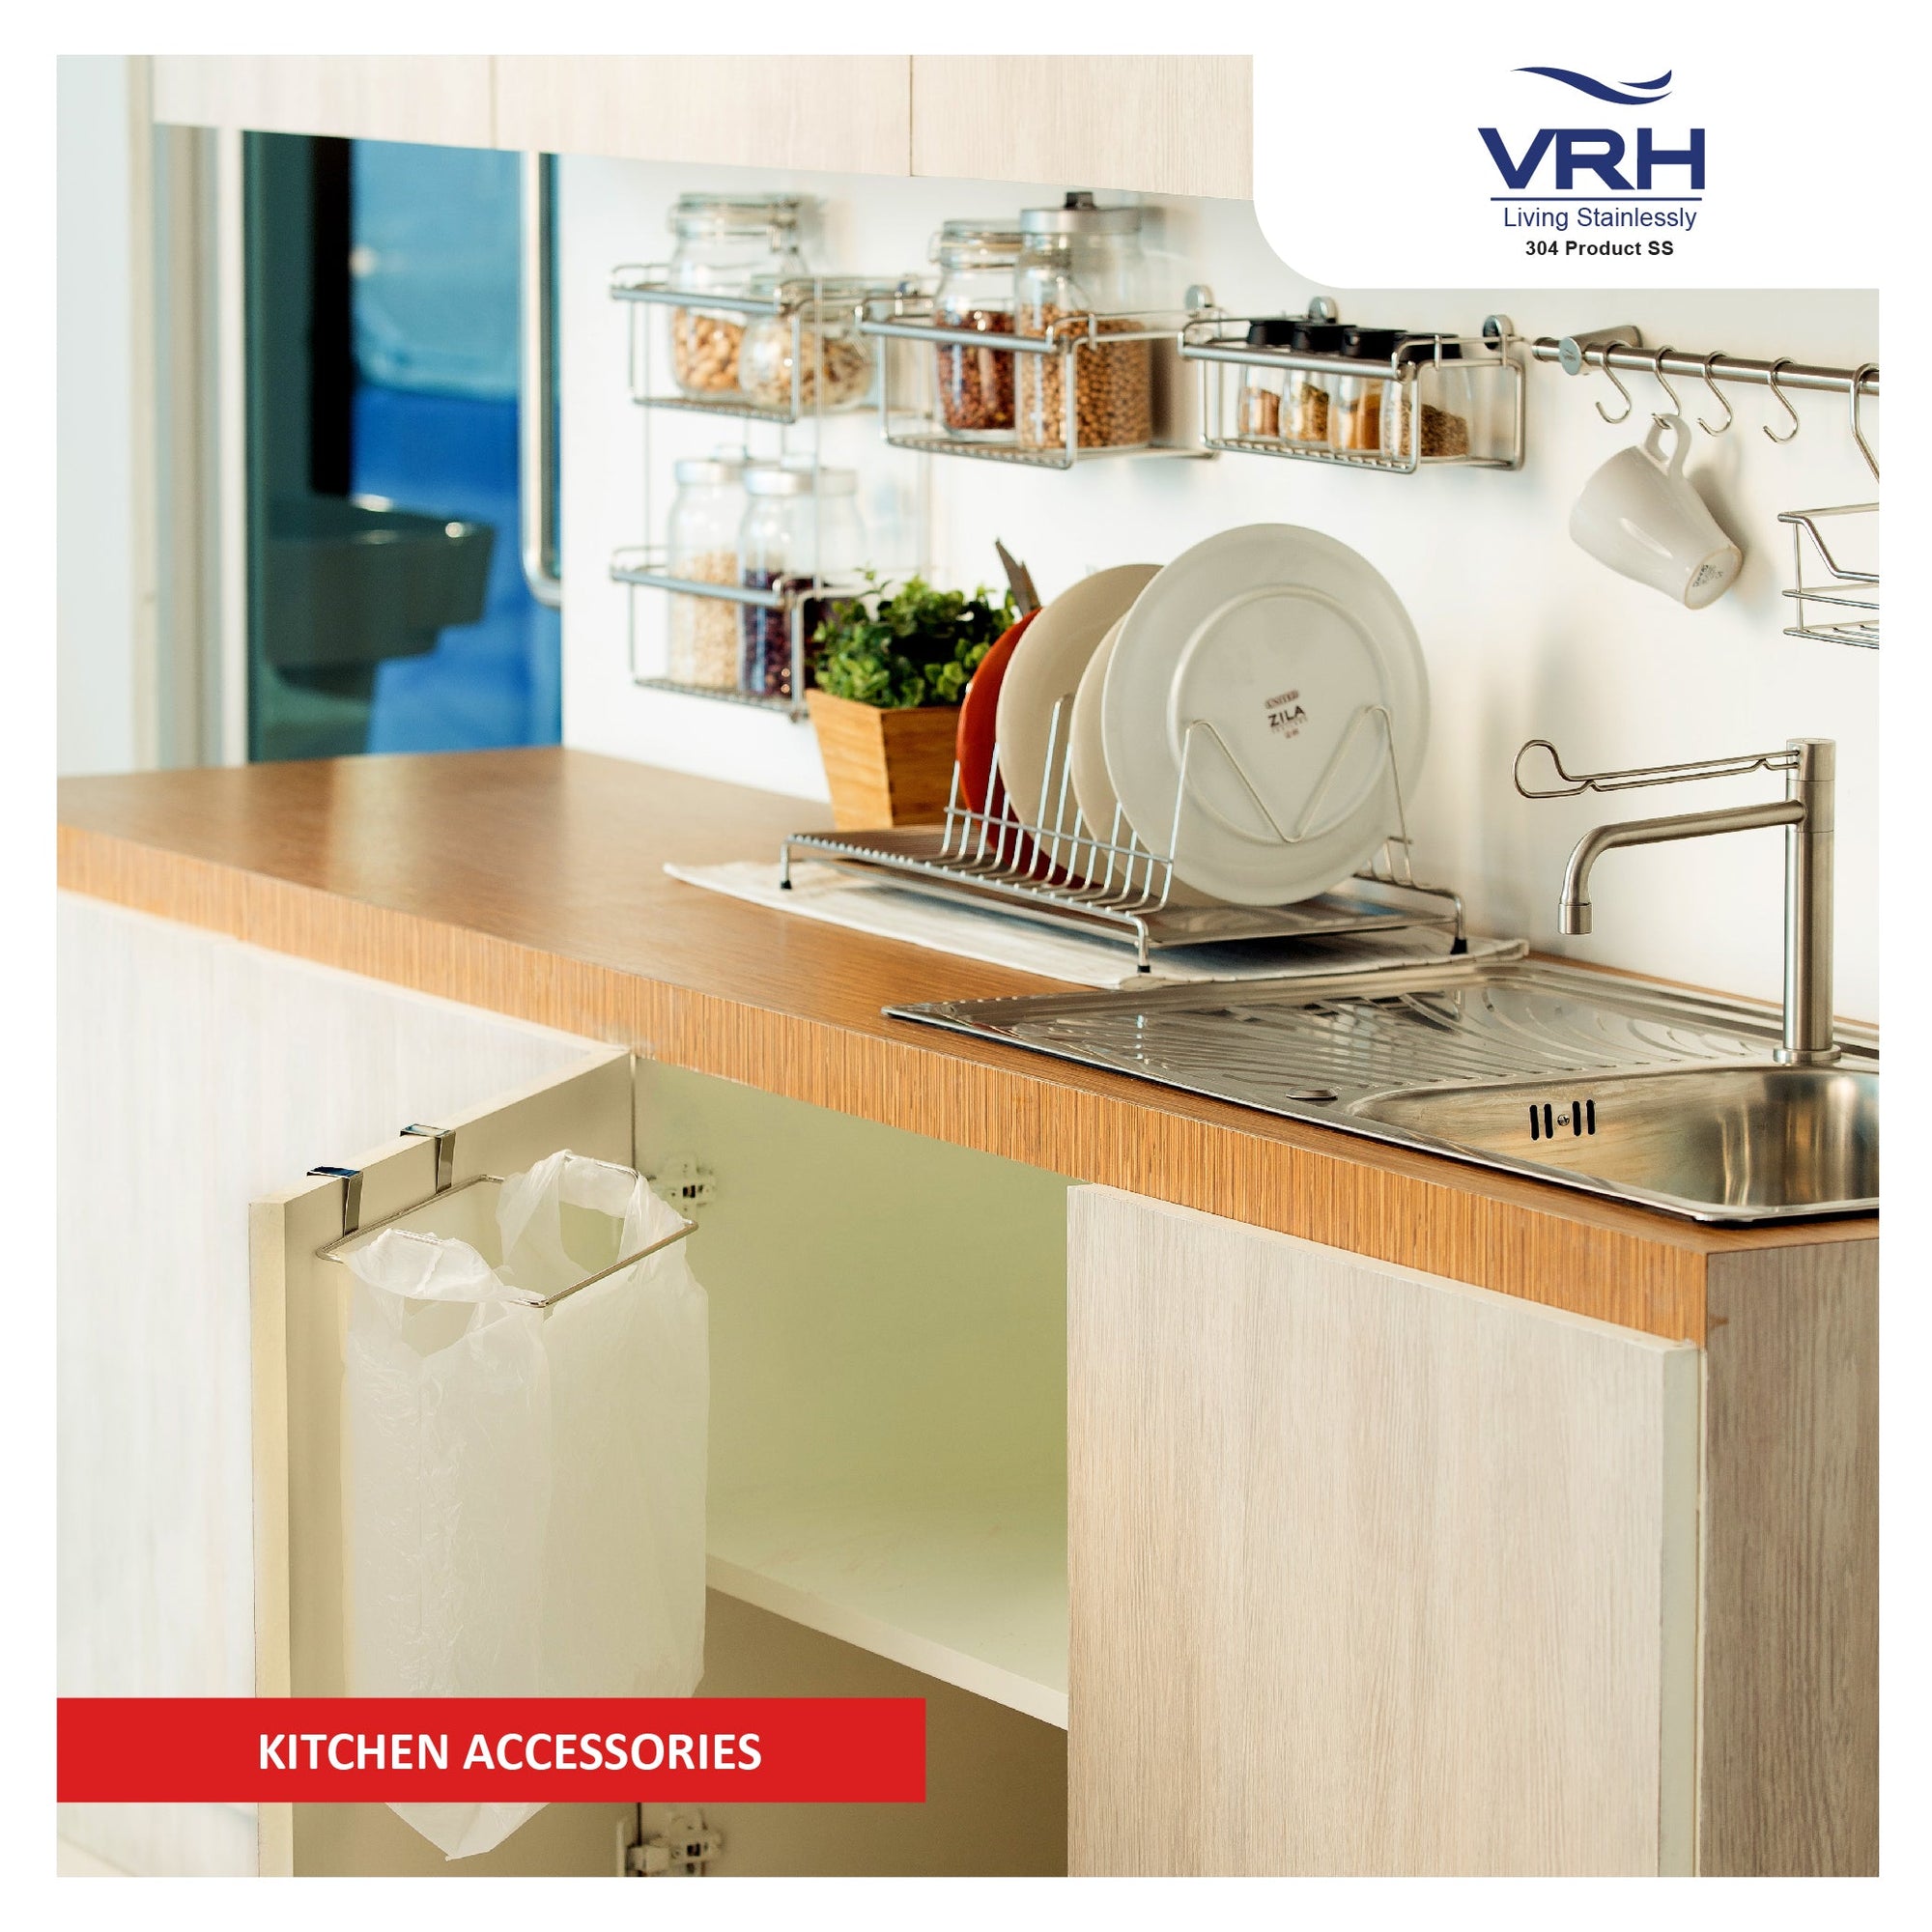 VRH Kitchen Accessories - Enhance Your Cooking Experience with Stylish and Functional Kitchen Products.